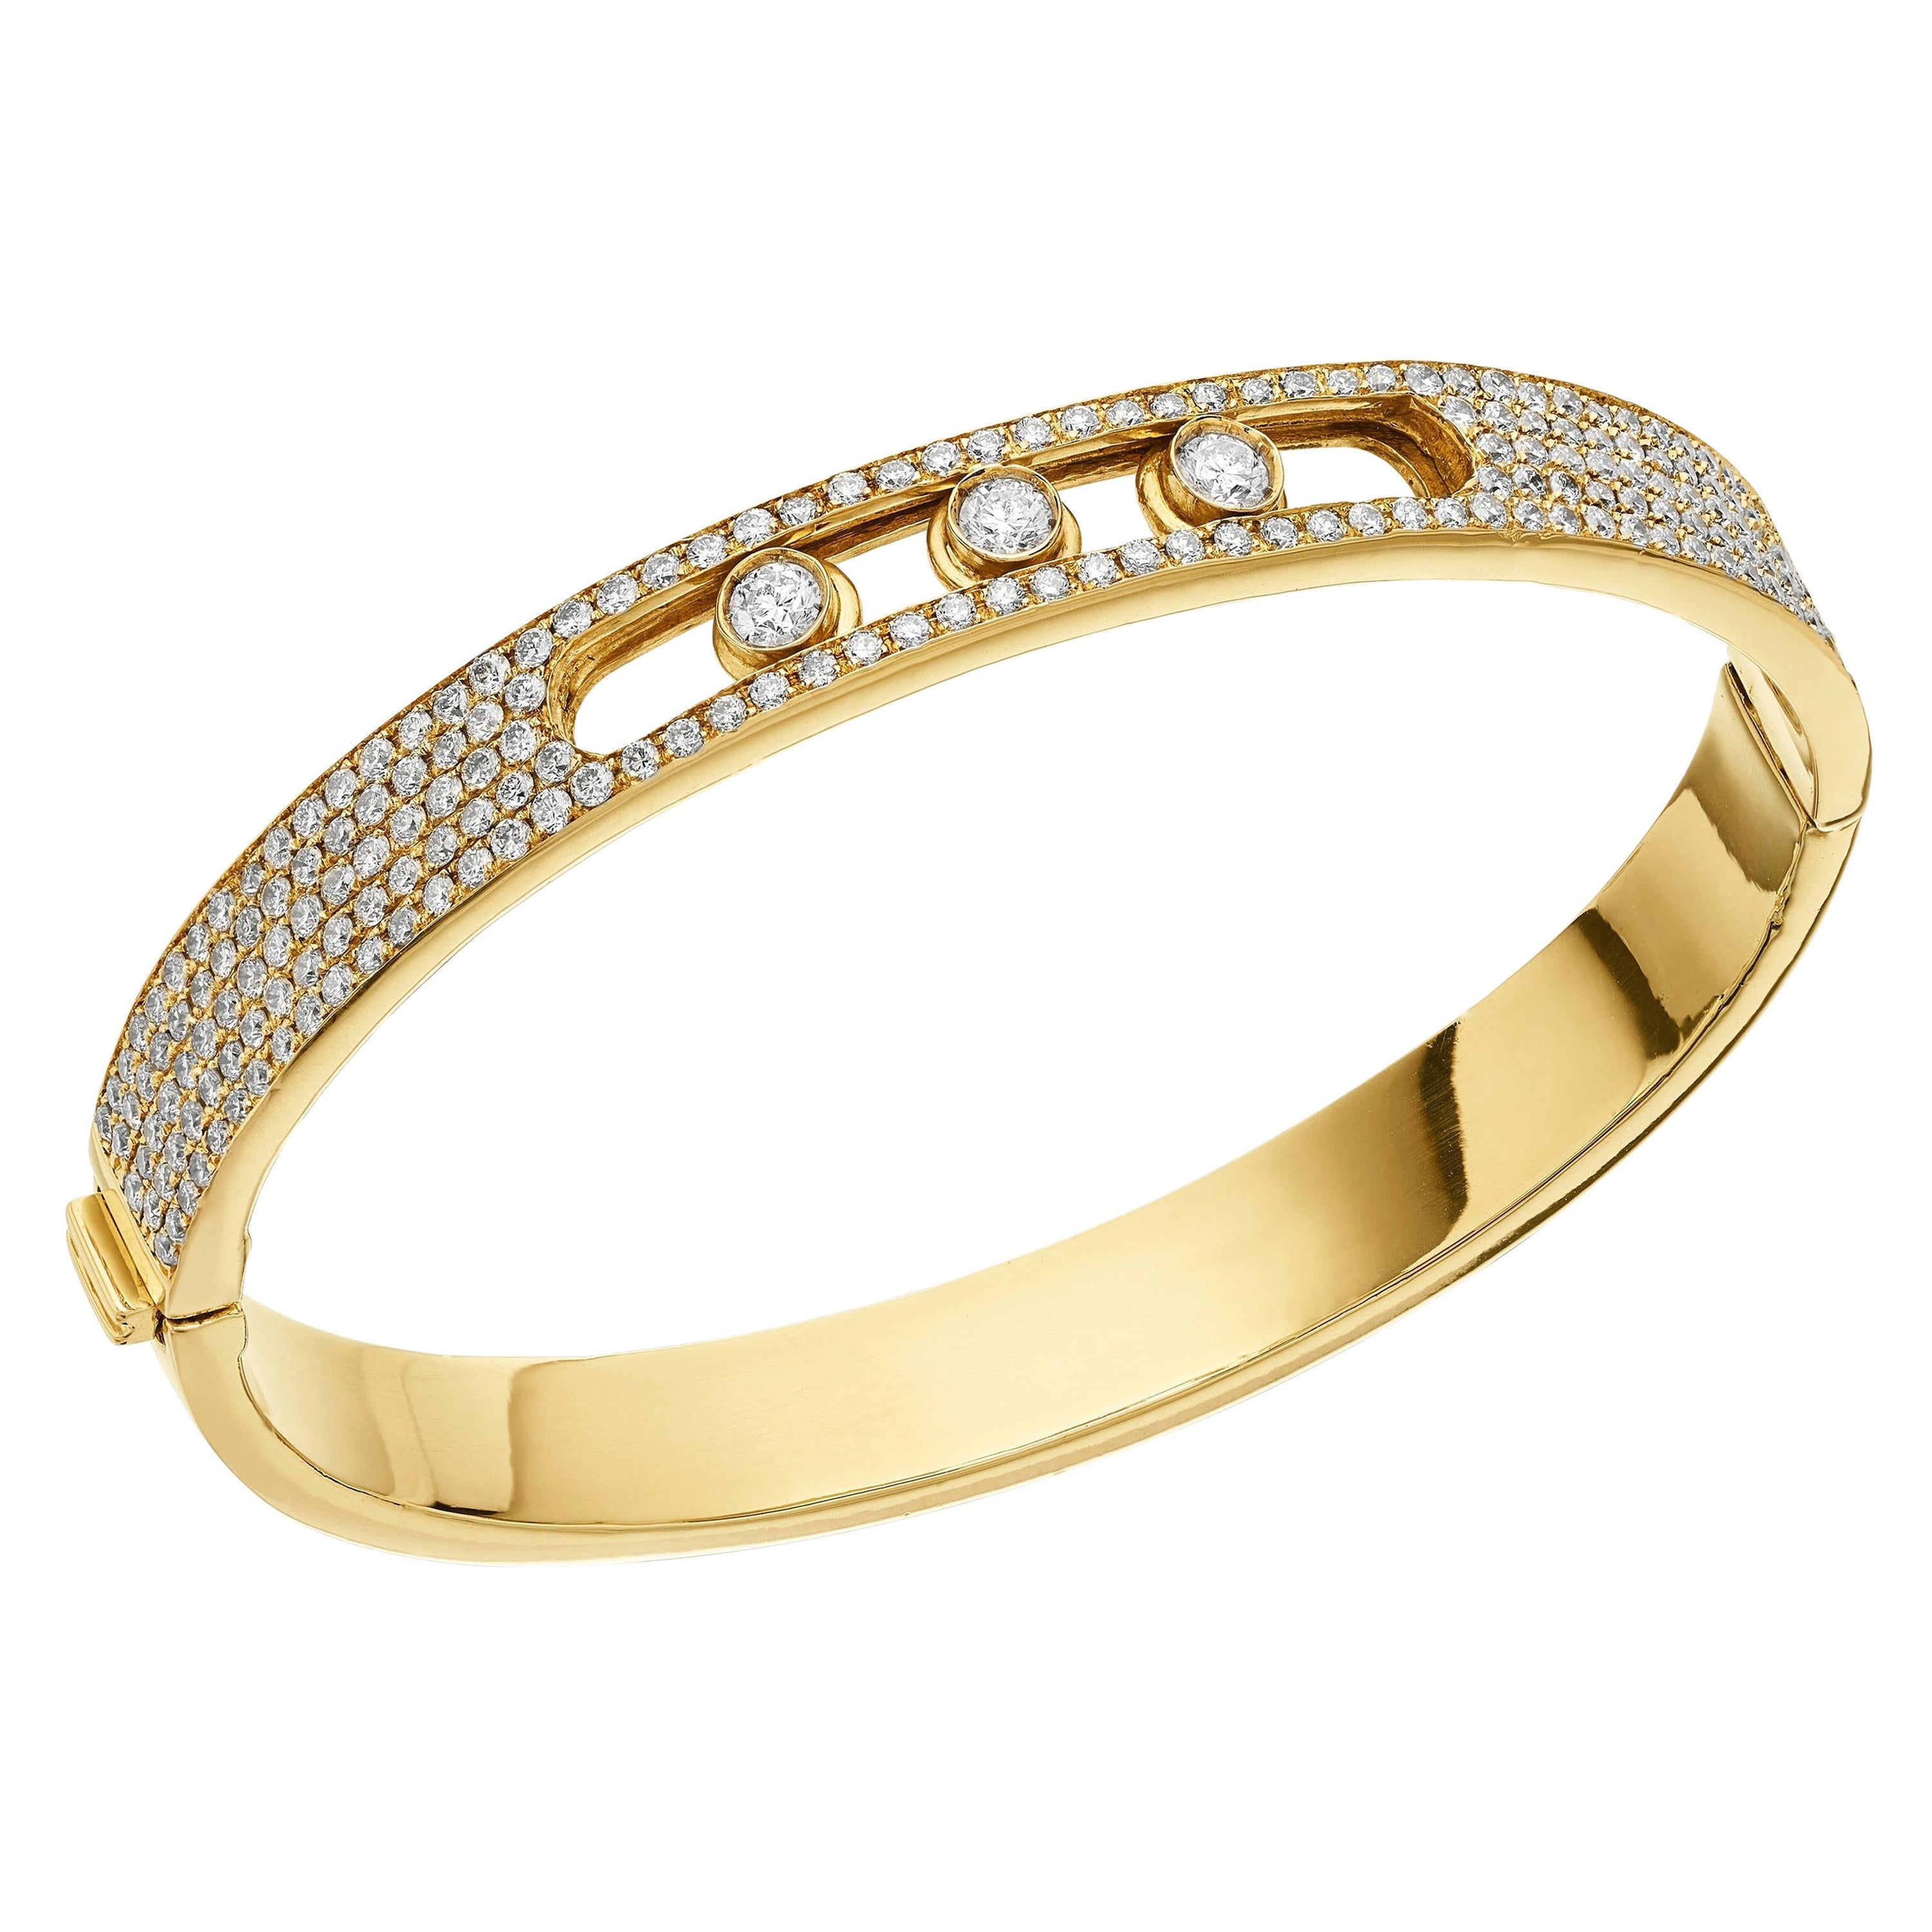 'Yessayan' Designer Moving Diamond Bangle in 18ct Yellow Gold For Sale